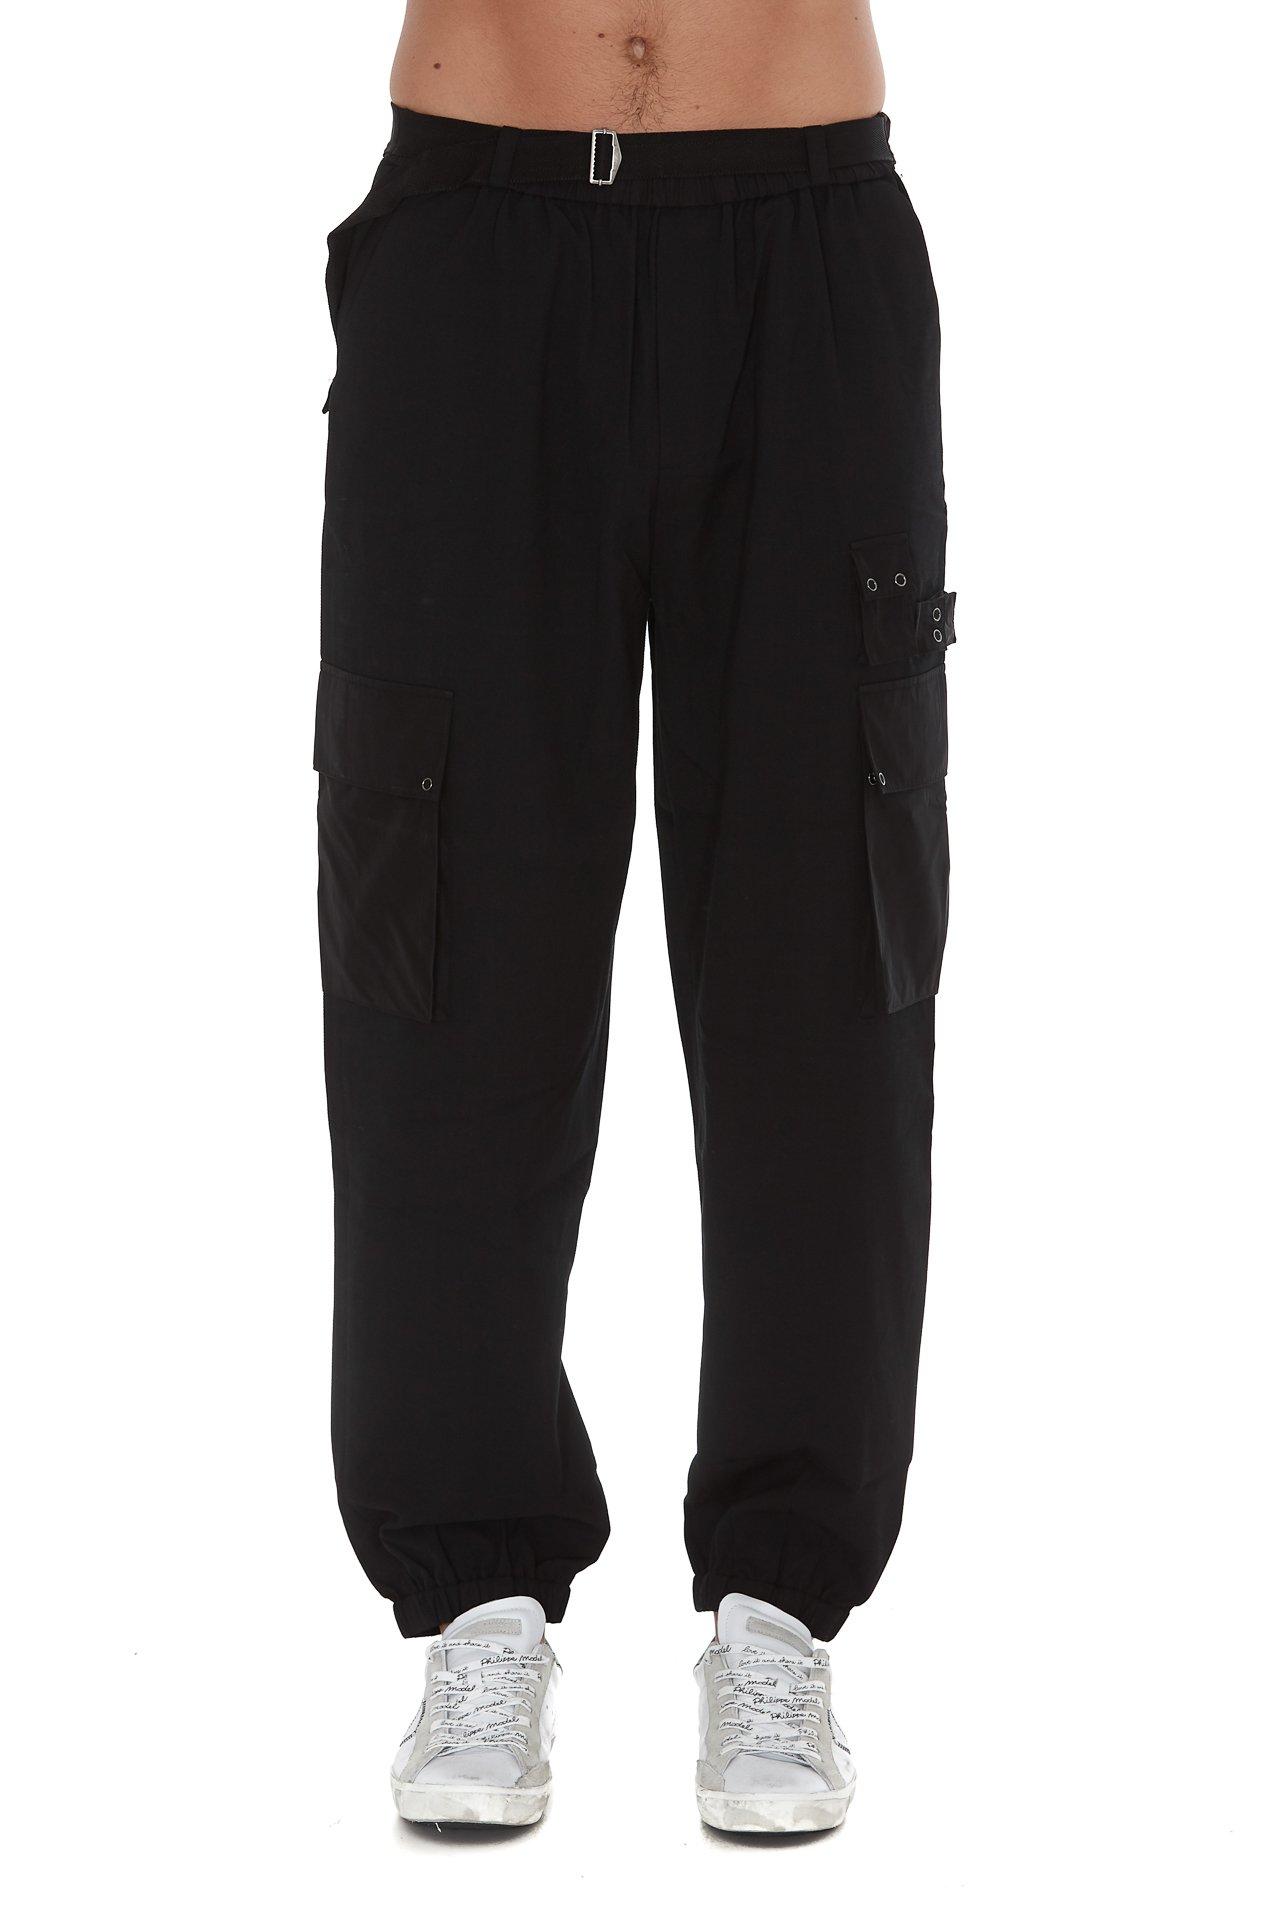 McQ Synthetic Cargo Pants in Black for Men - Lyst